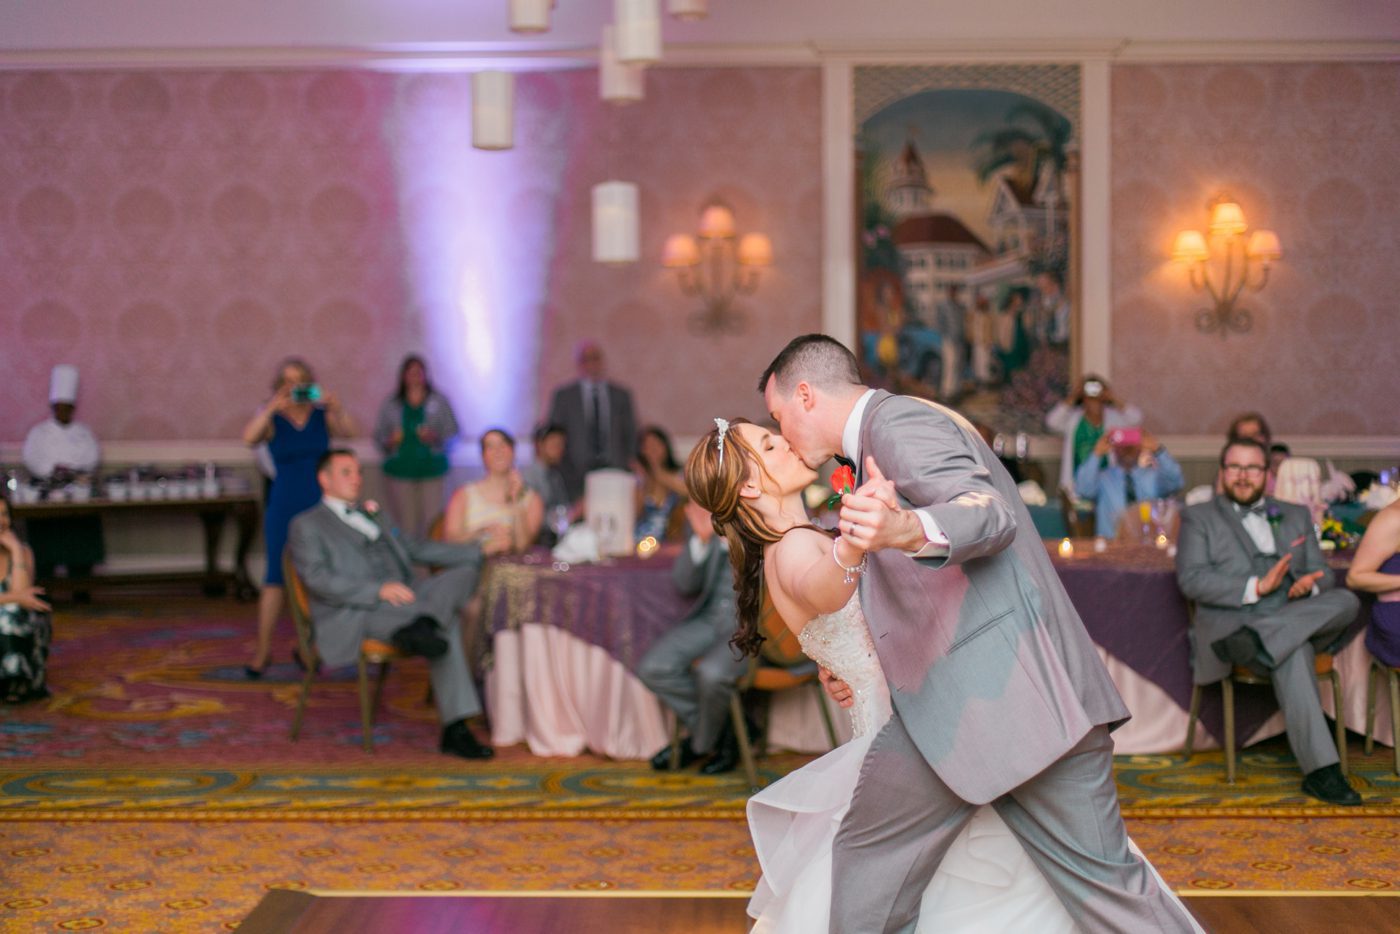 Groom dipping the bride during their first dance at Disney World 